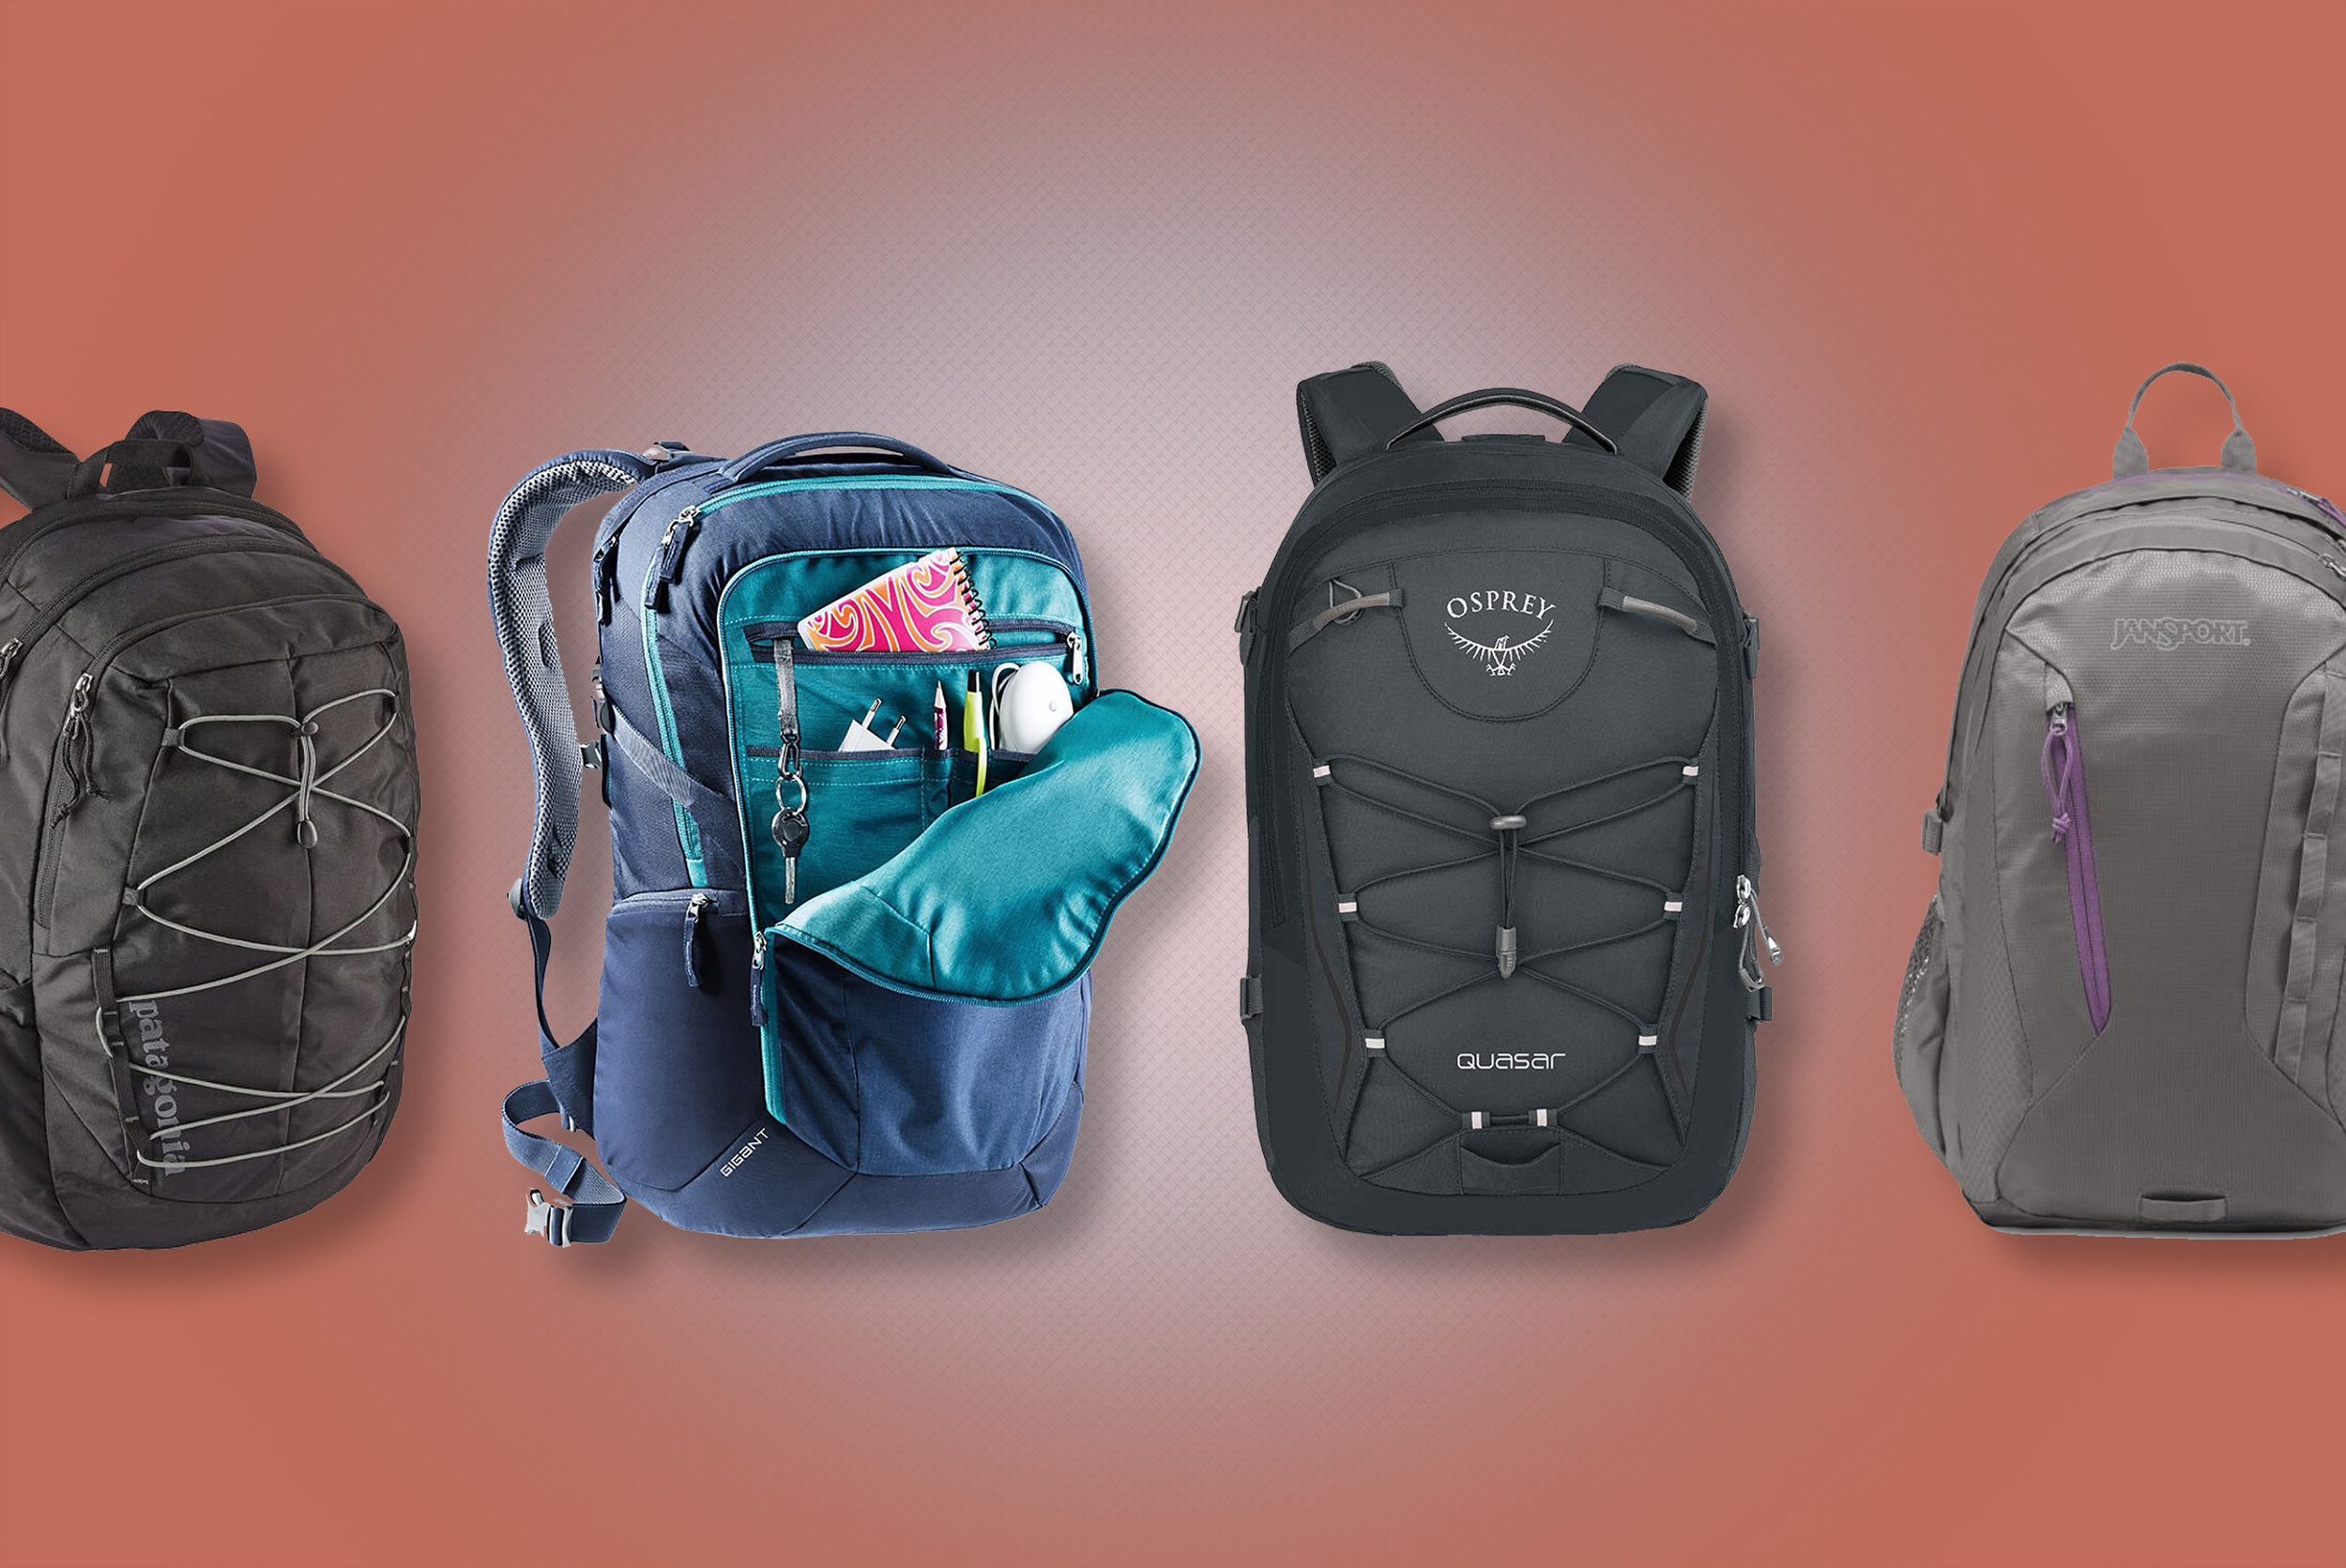 where to get cheap north face backpacks